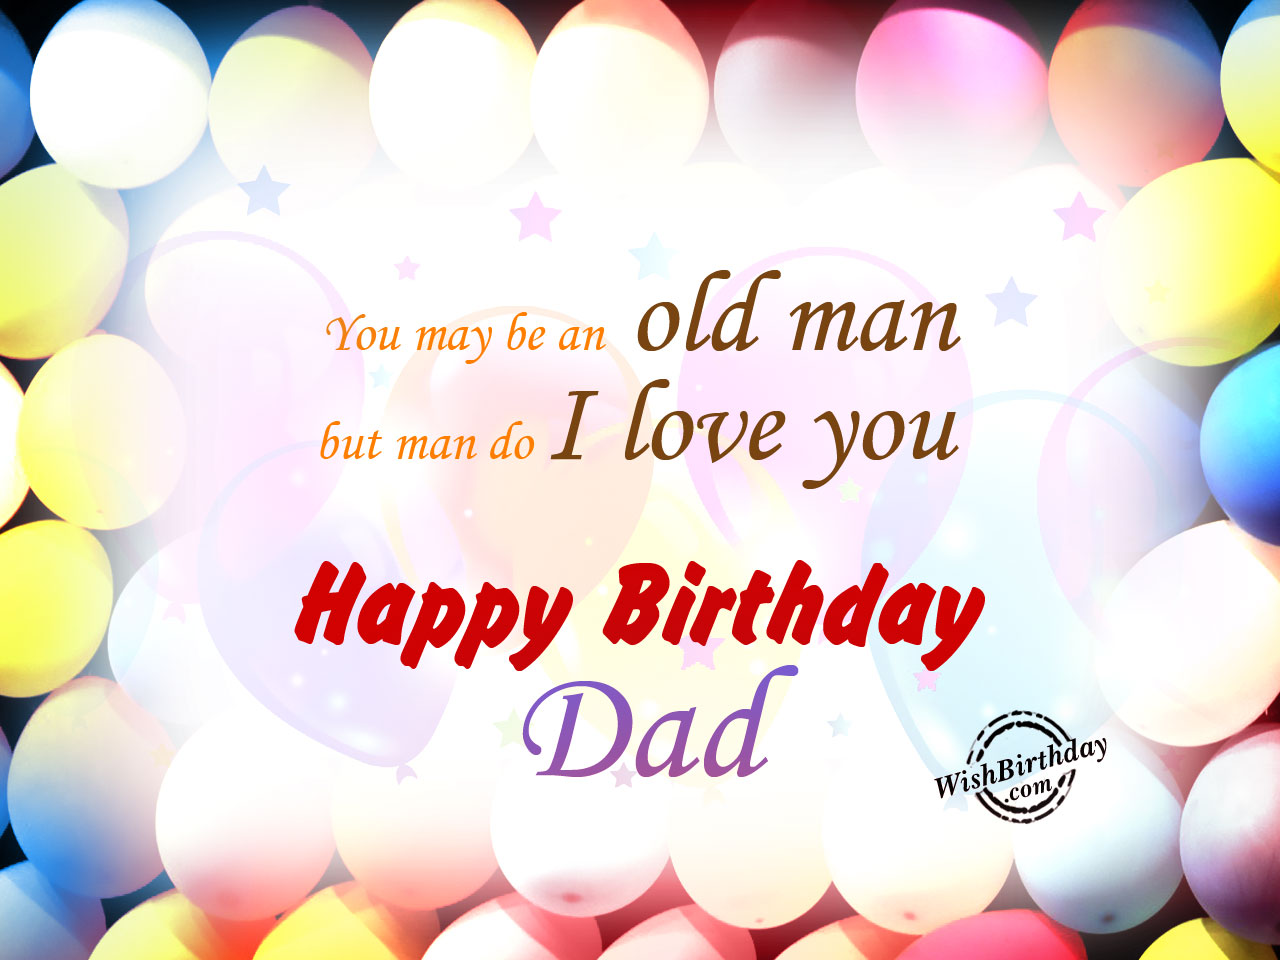 New Happy Birthday Appa Quotes In Tamil Naturesimagesart.